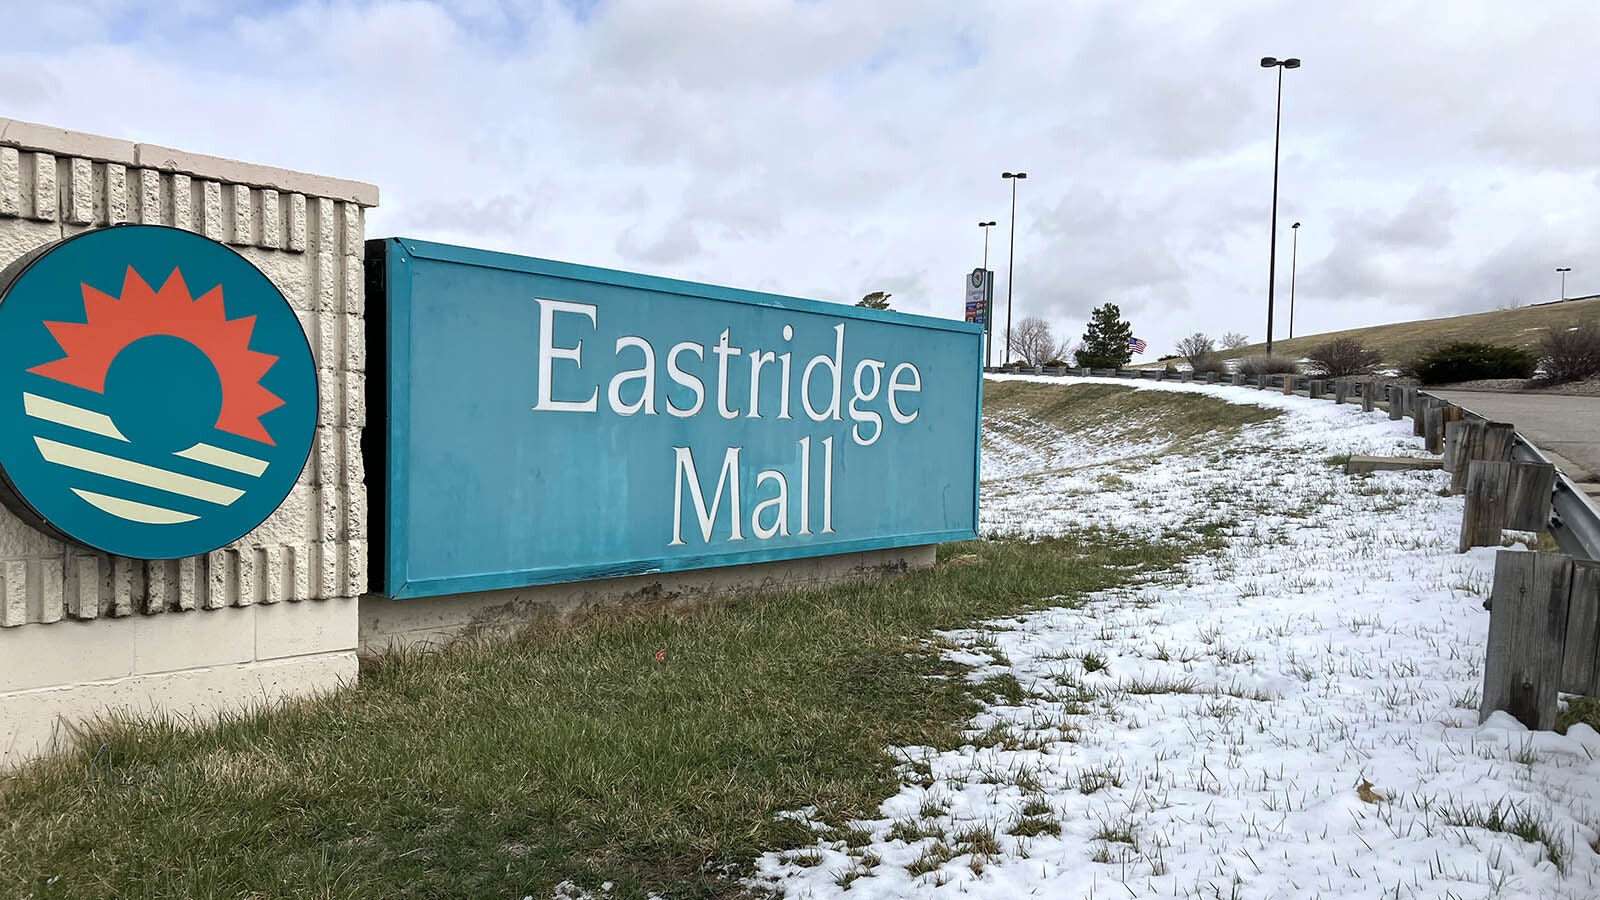 Eastridge Mall in Casper. Casper Police Department reported they have arrested two juvenile suspects related to the fatal stabbing incident that took the life of another juvenile on Sunday. All those involved were under the age of 16.